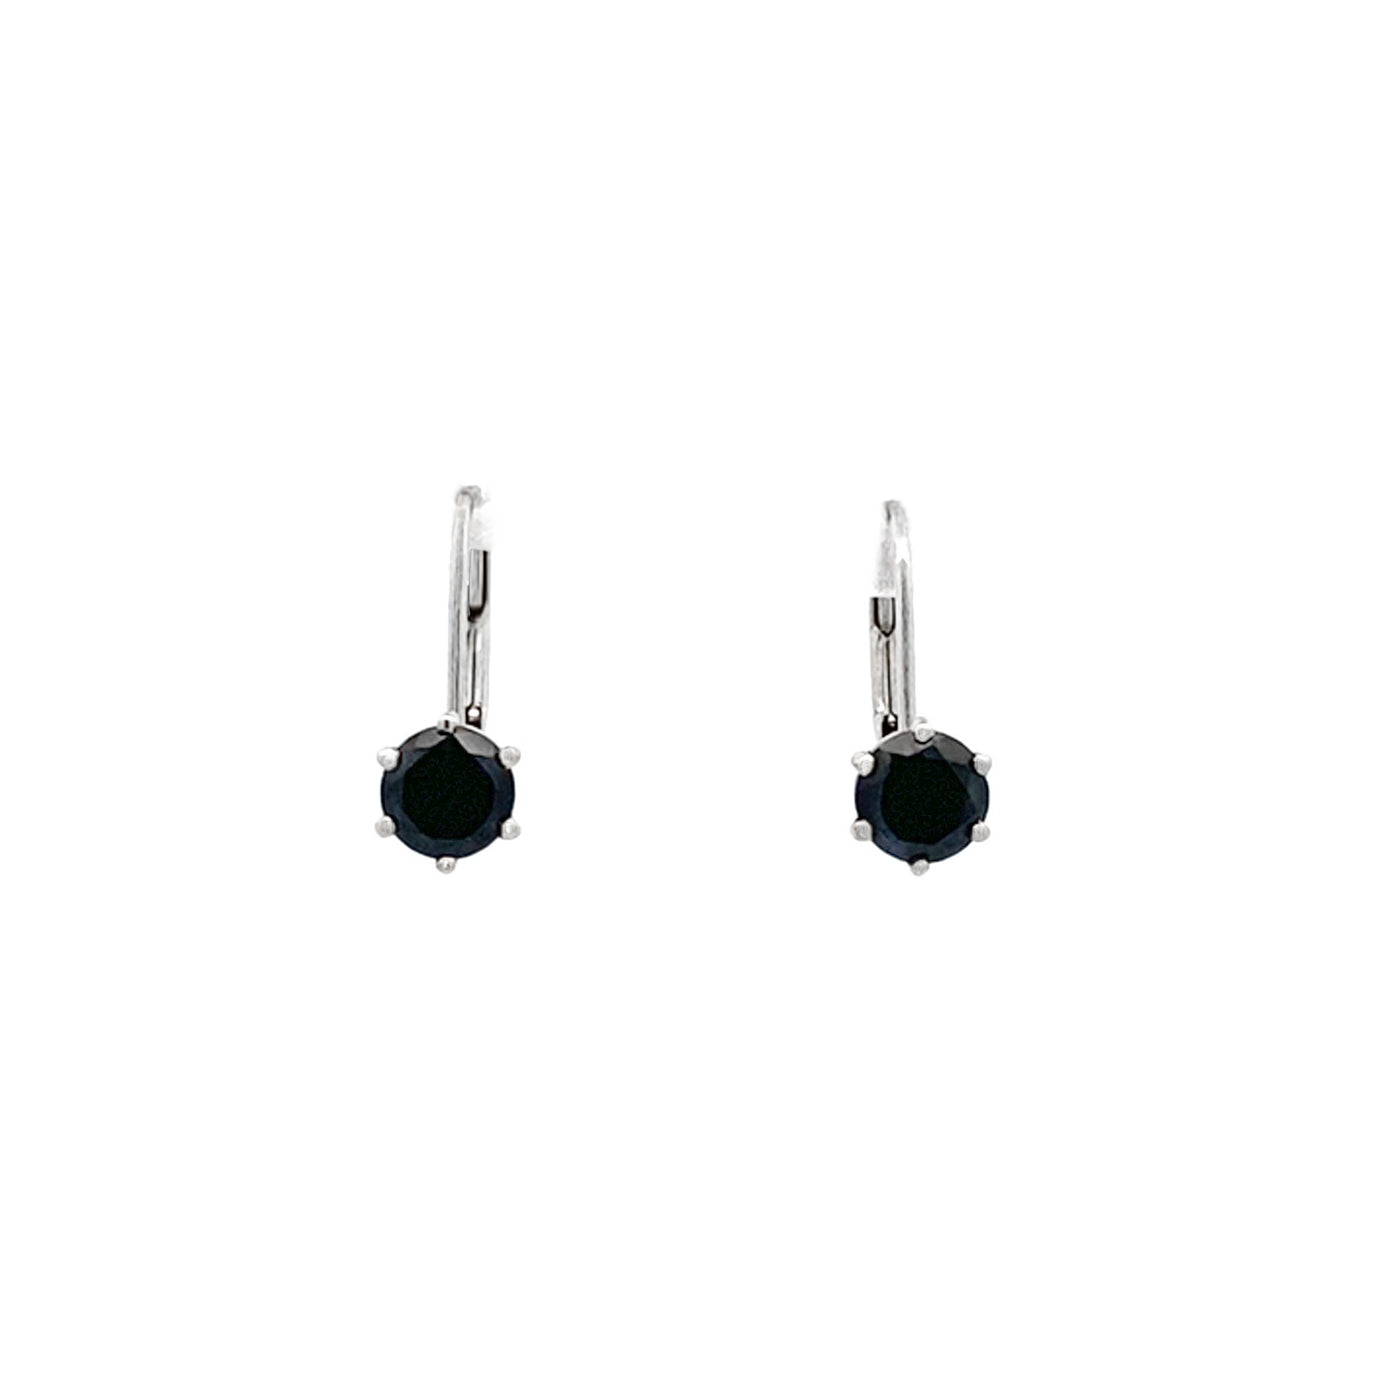 Round Cut Black Spinel Leverback Earrings in White Gold | 1.39ctw